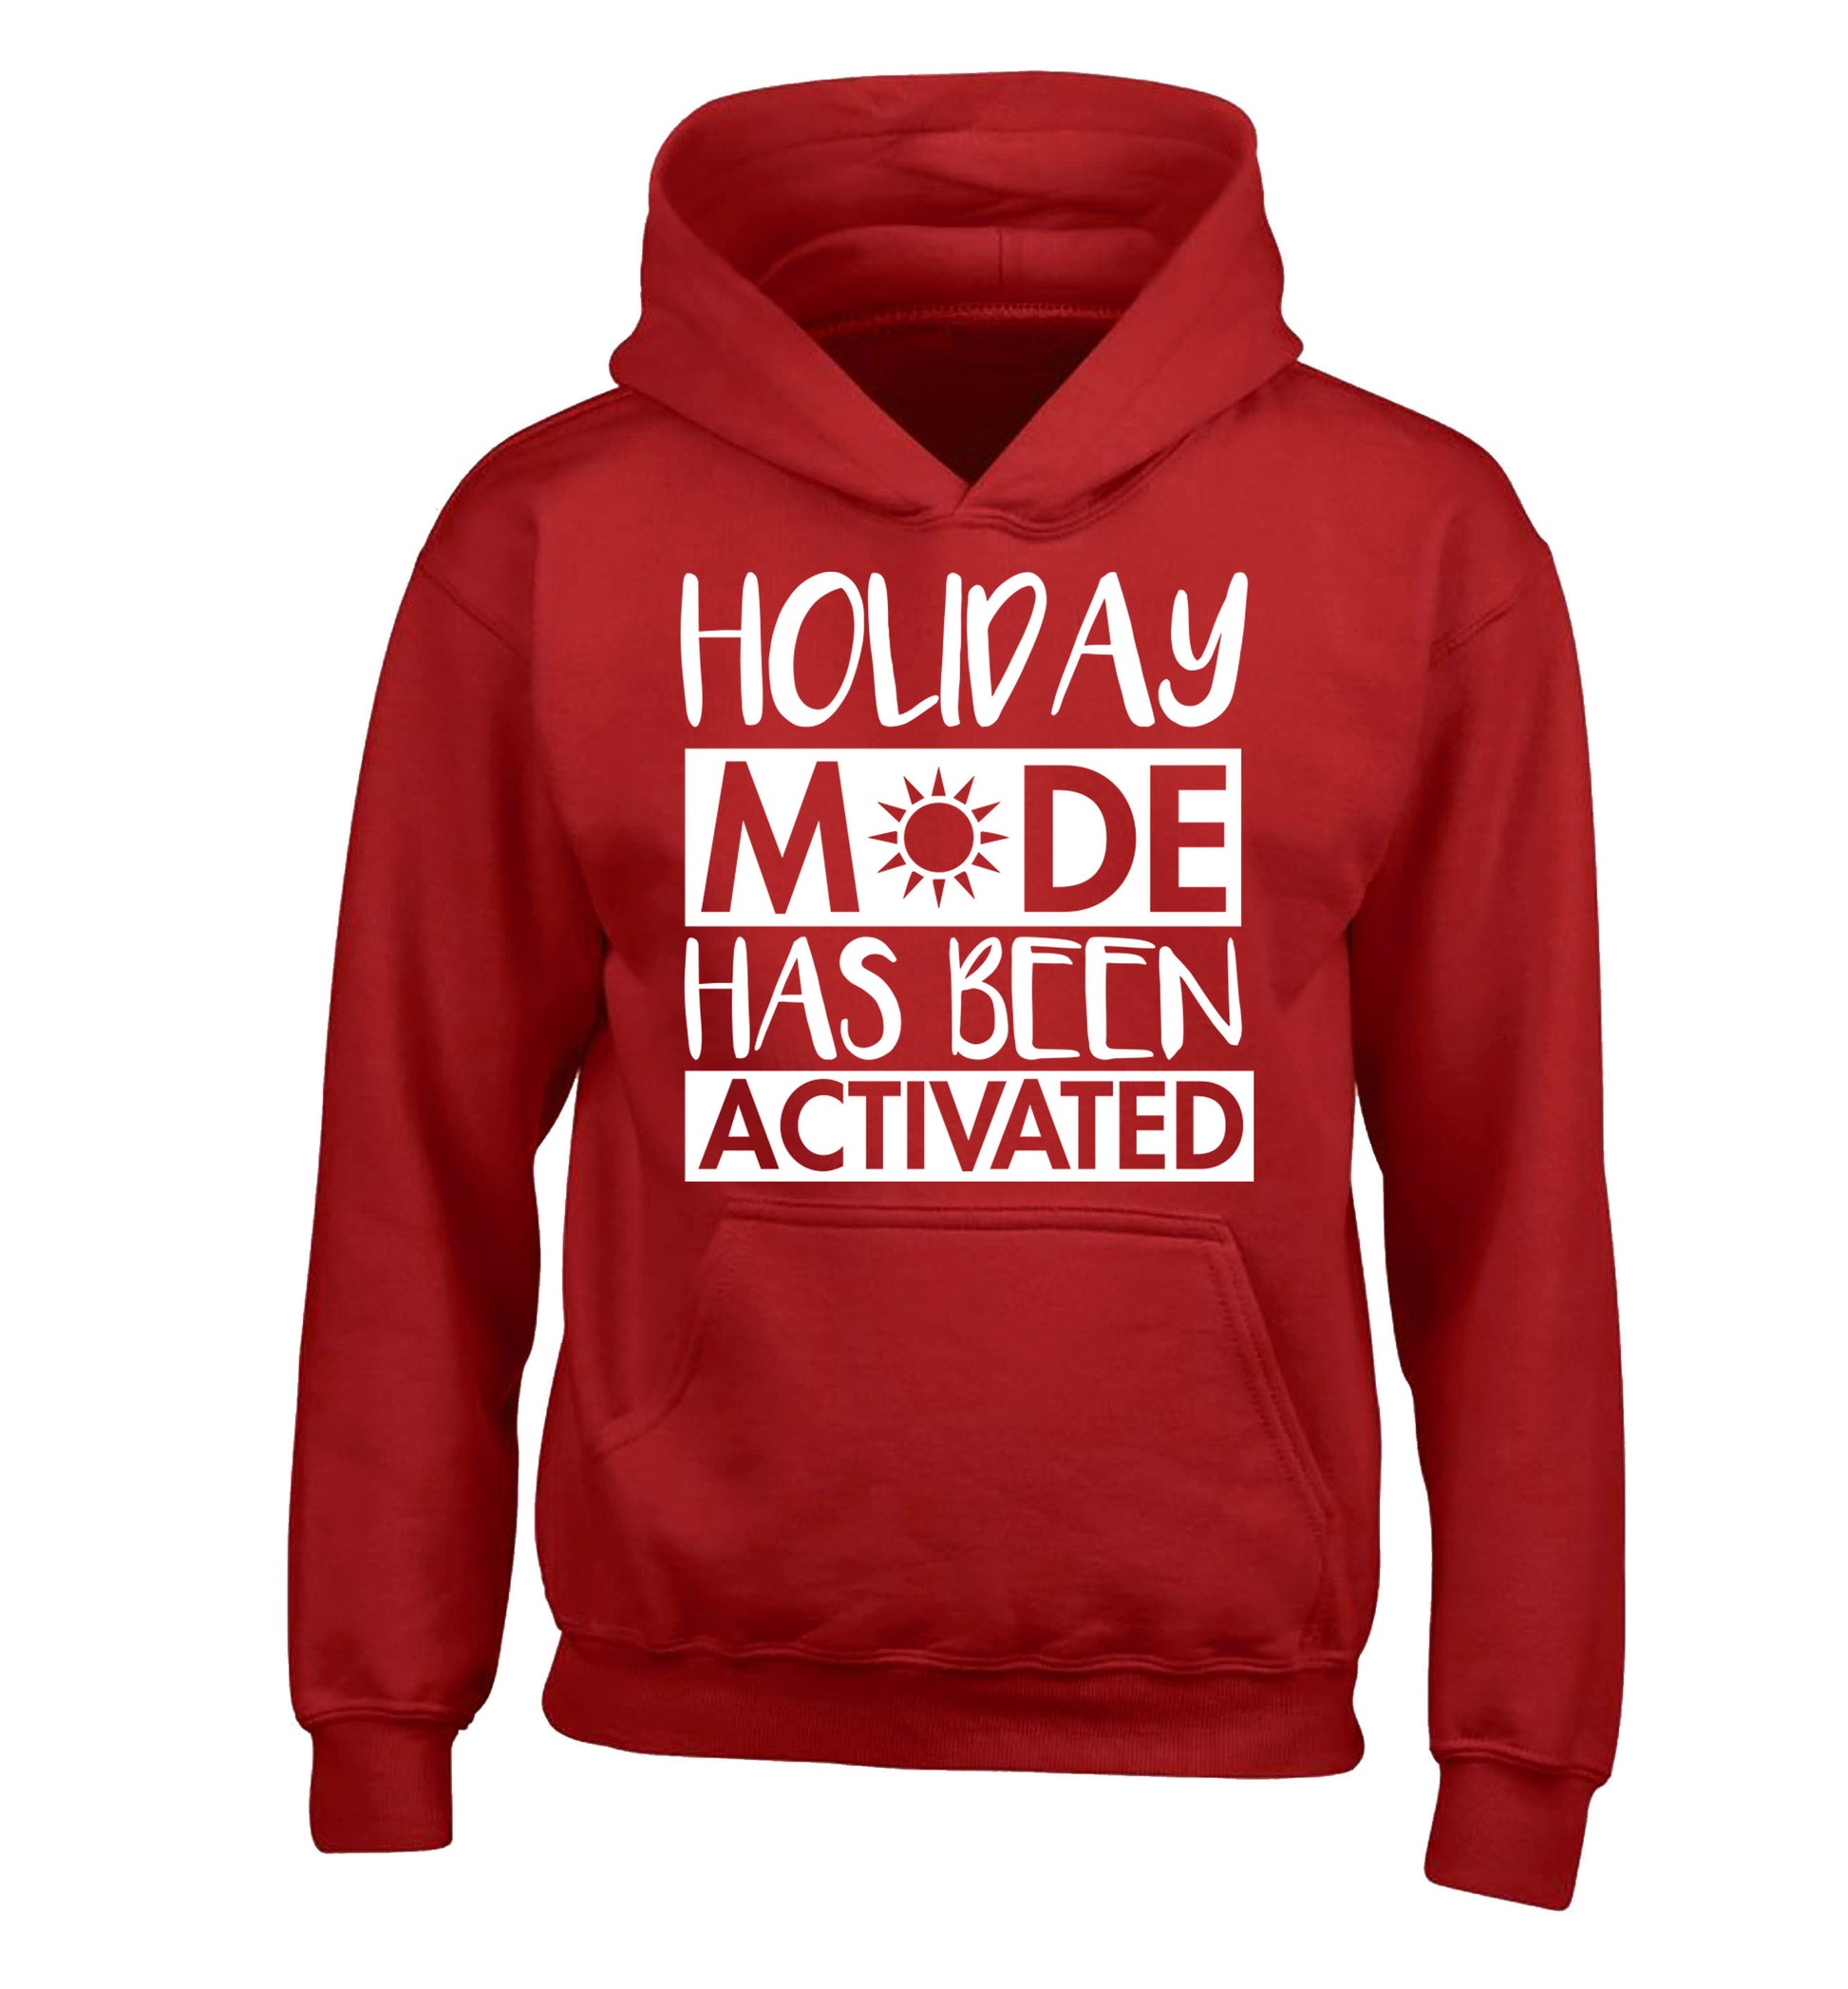 Holiday mode has been activated children's red hoodie 12-14 Years